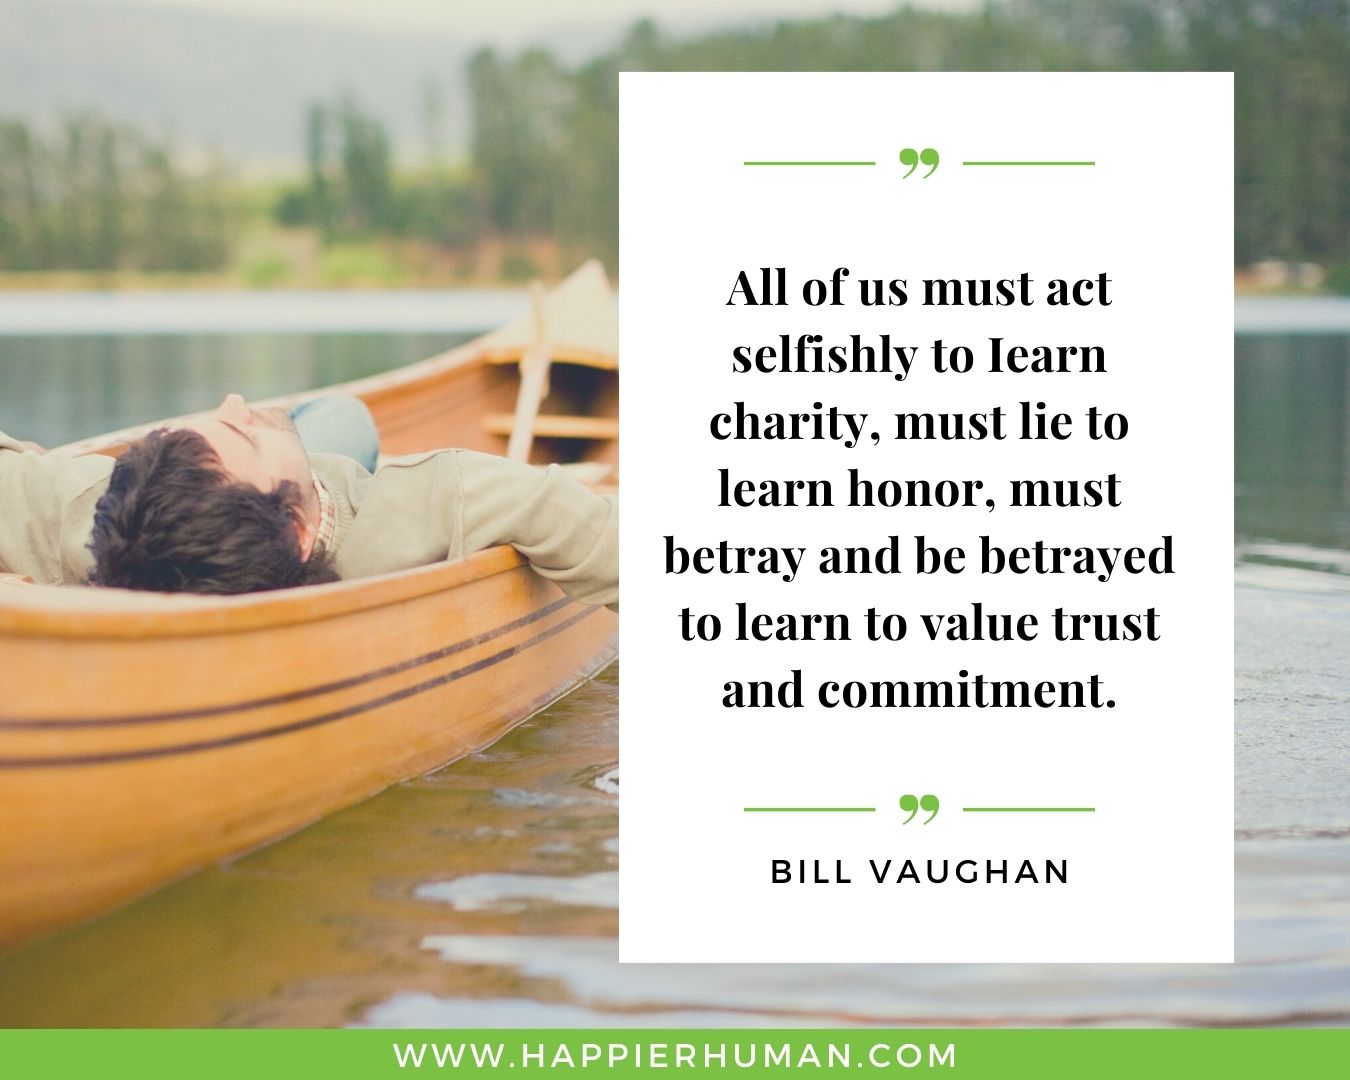 Broken Trust Quotes - “All of us must act selfishly to Iearn charity, must lie to learn honor, must betray and be betrayed to learn to value trust and commitment.” - Bill Vaughan